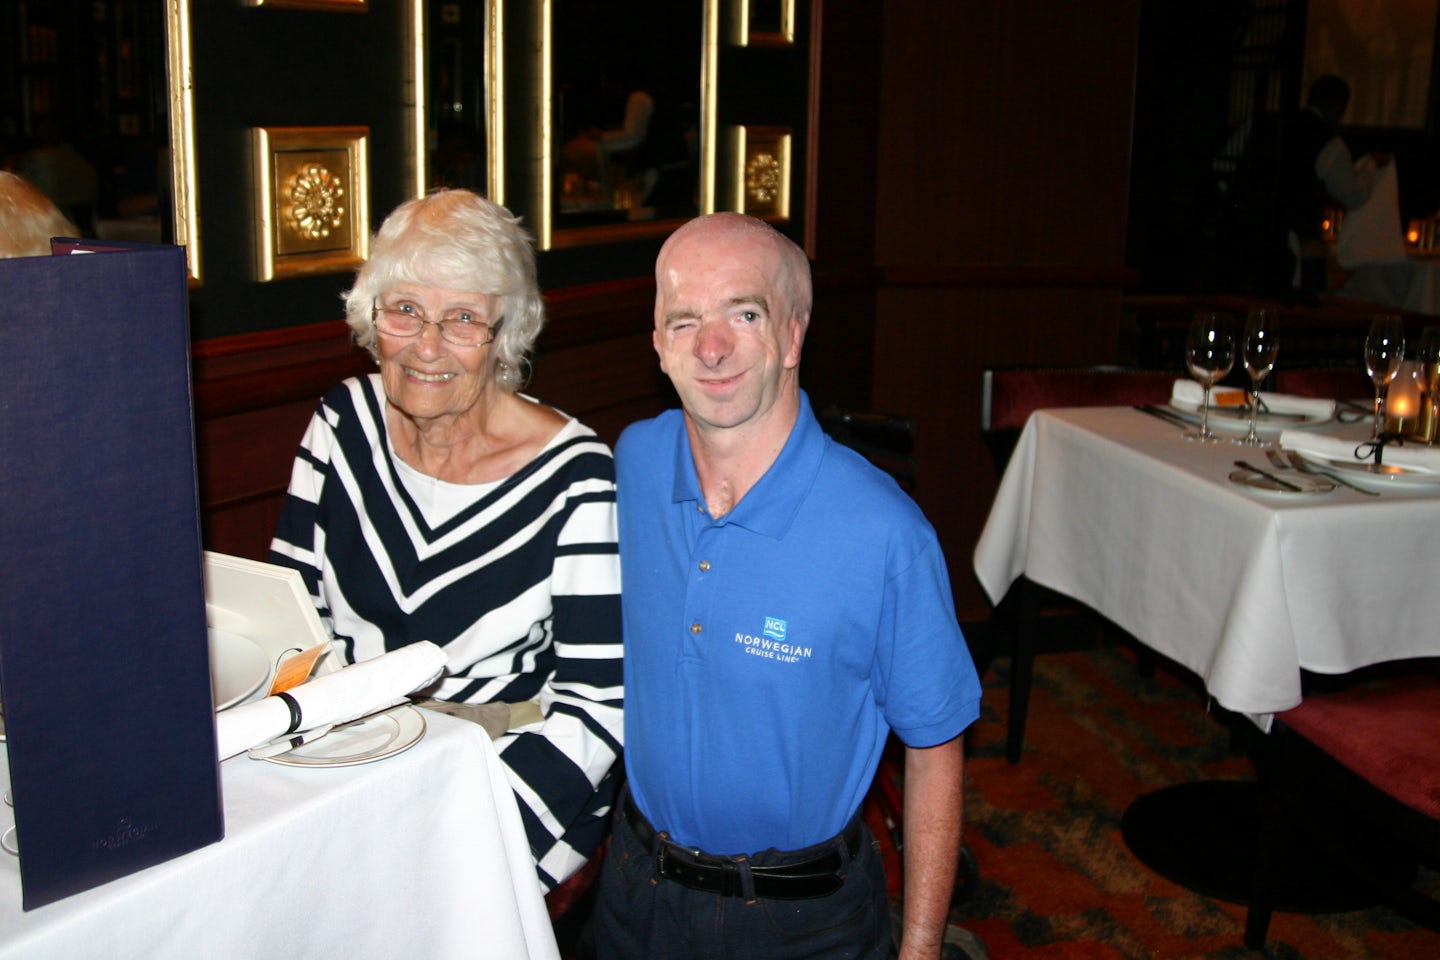 Me with Mom at Le Bistro, for dinner on last night of cruise